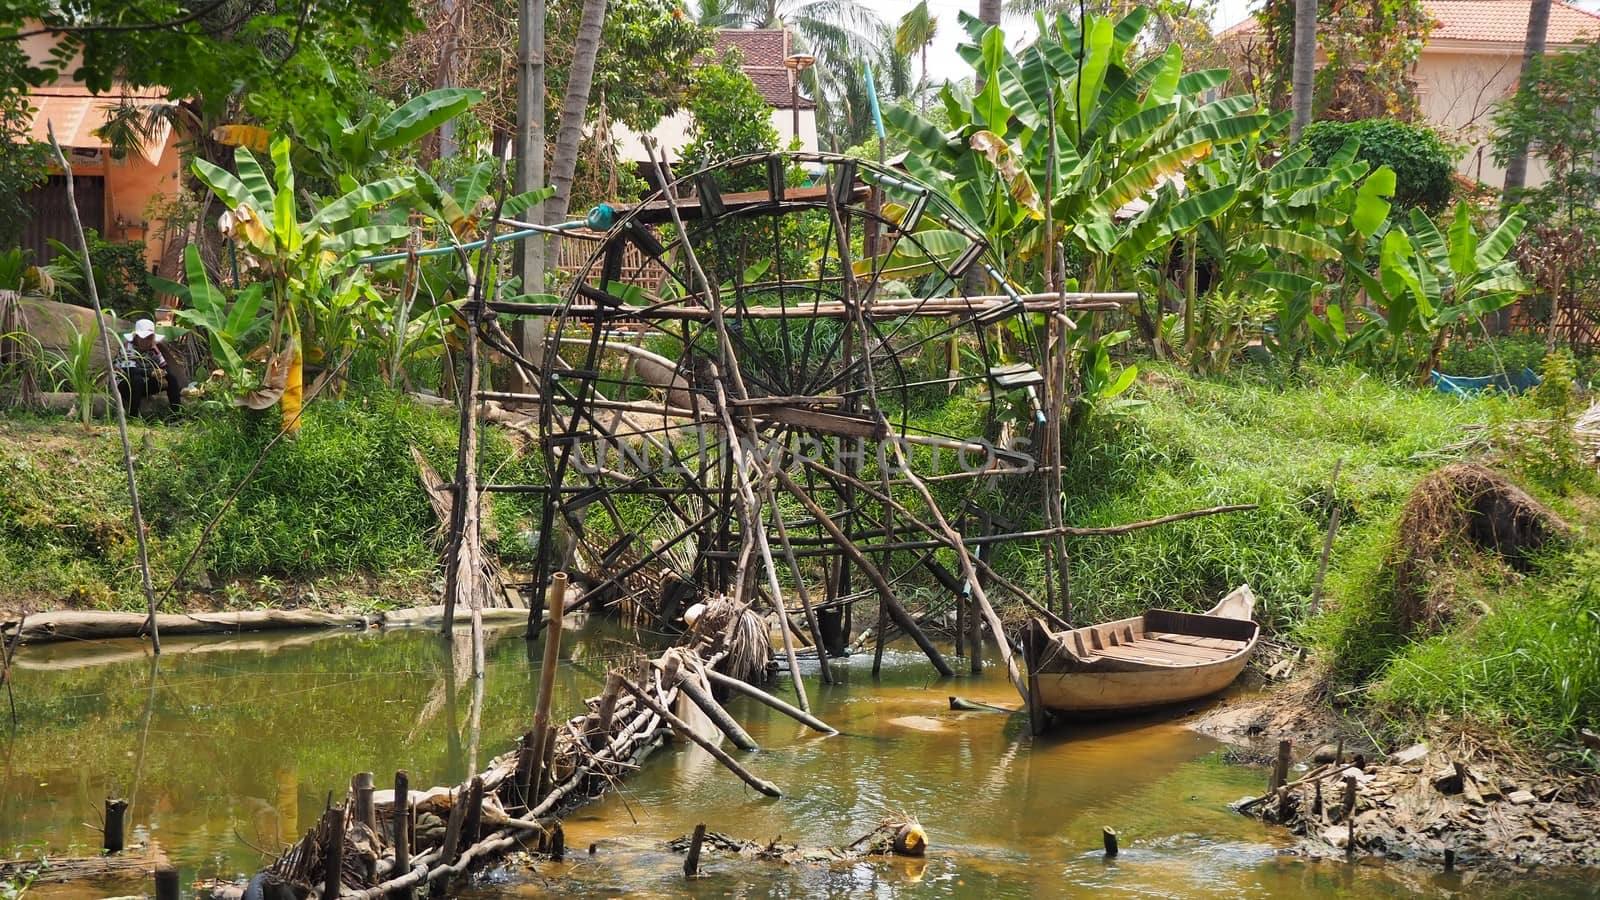 a boat next to a water wheel pump in the river in siem reap cambodia by AndrewUK